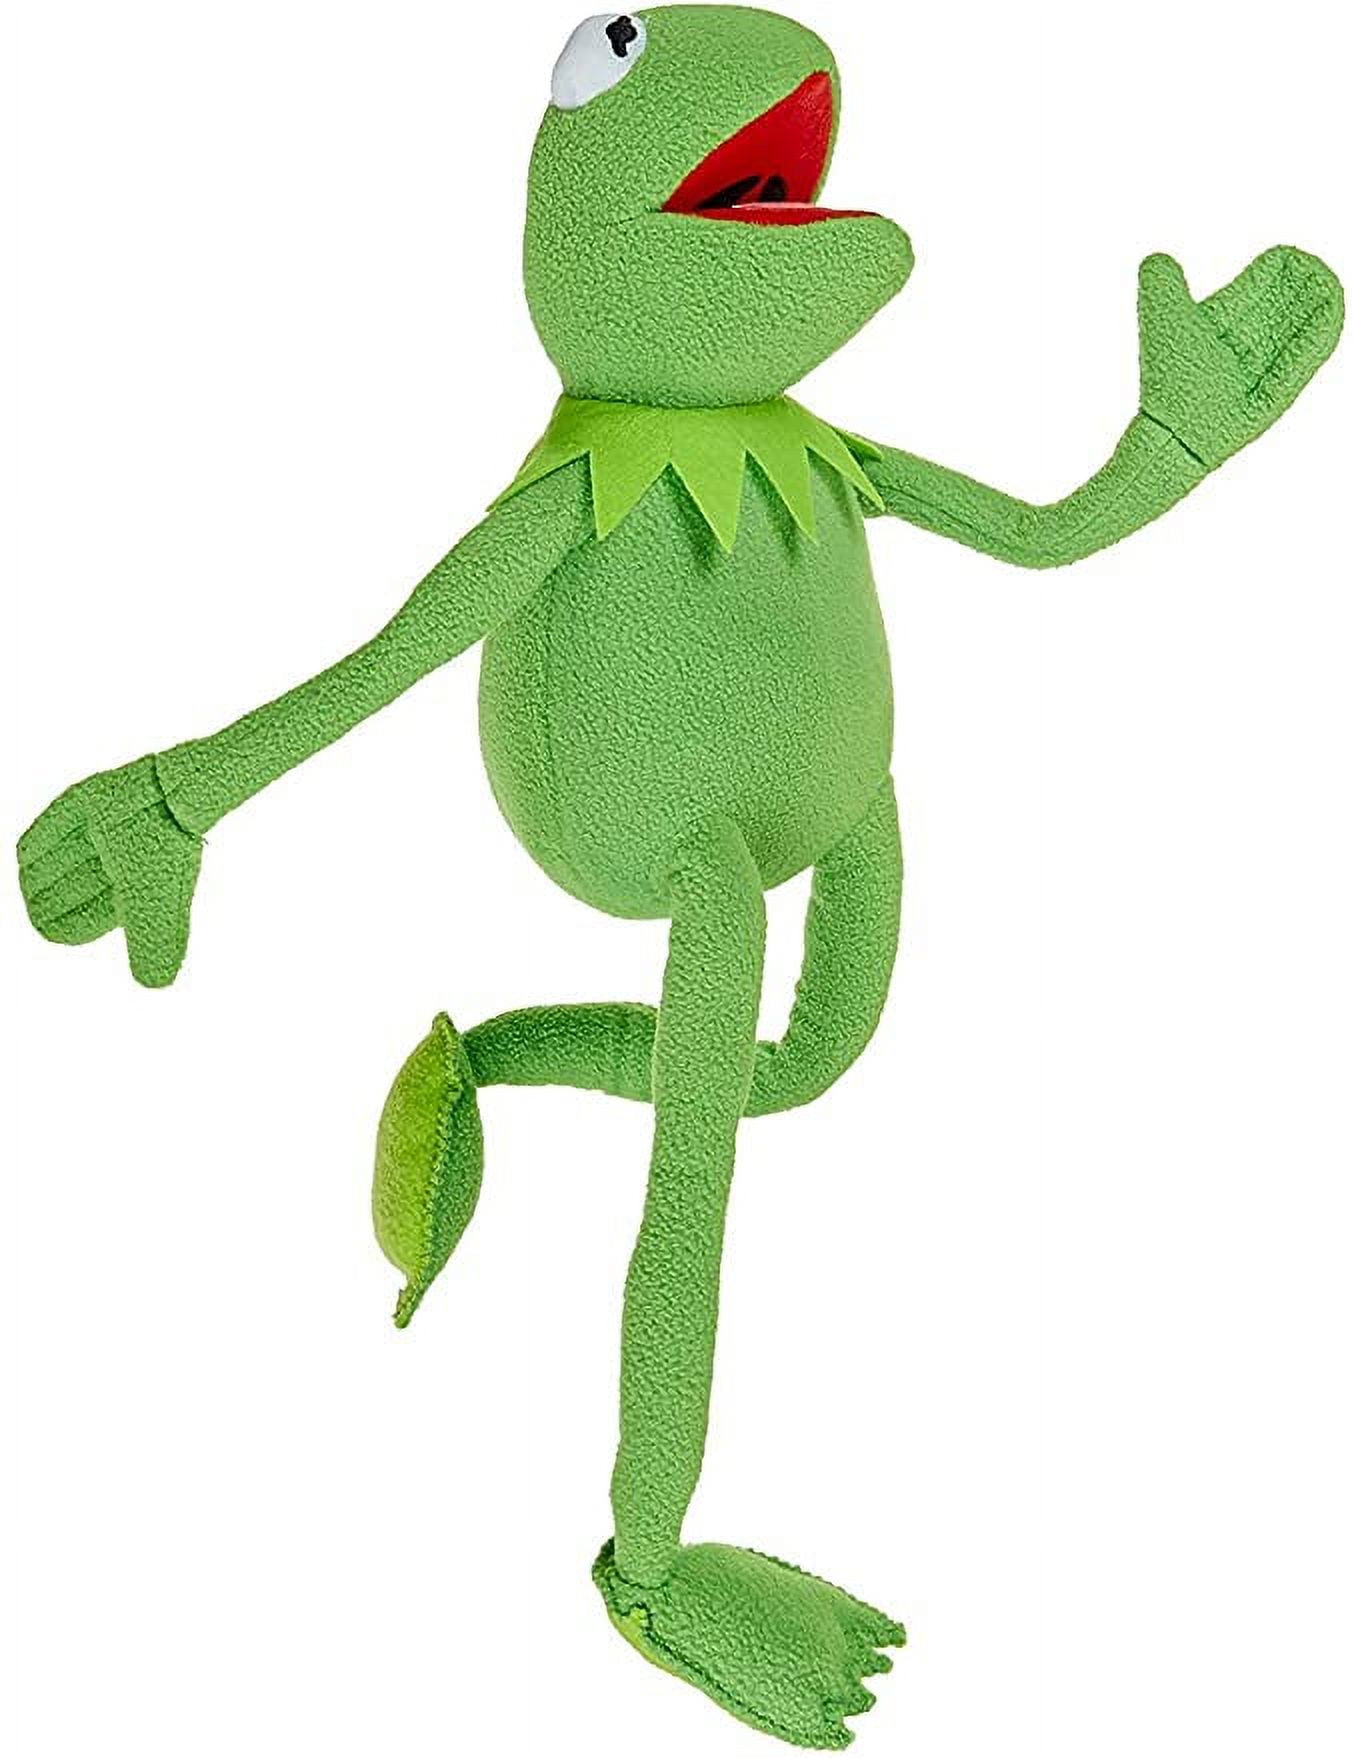 Cute Puppets Frog,Kermit Frog Puppet Plush The Muppet Show Large Kermit  Puppets Plush Toy Stuffed,Soft Frog Cute Puppet,Gift